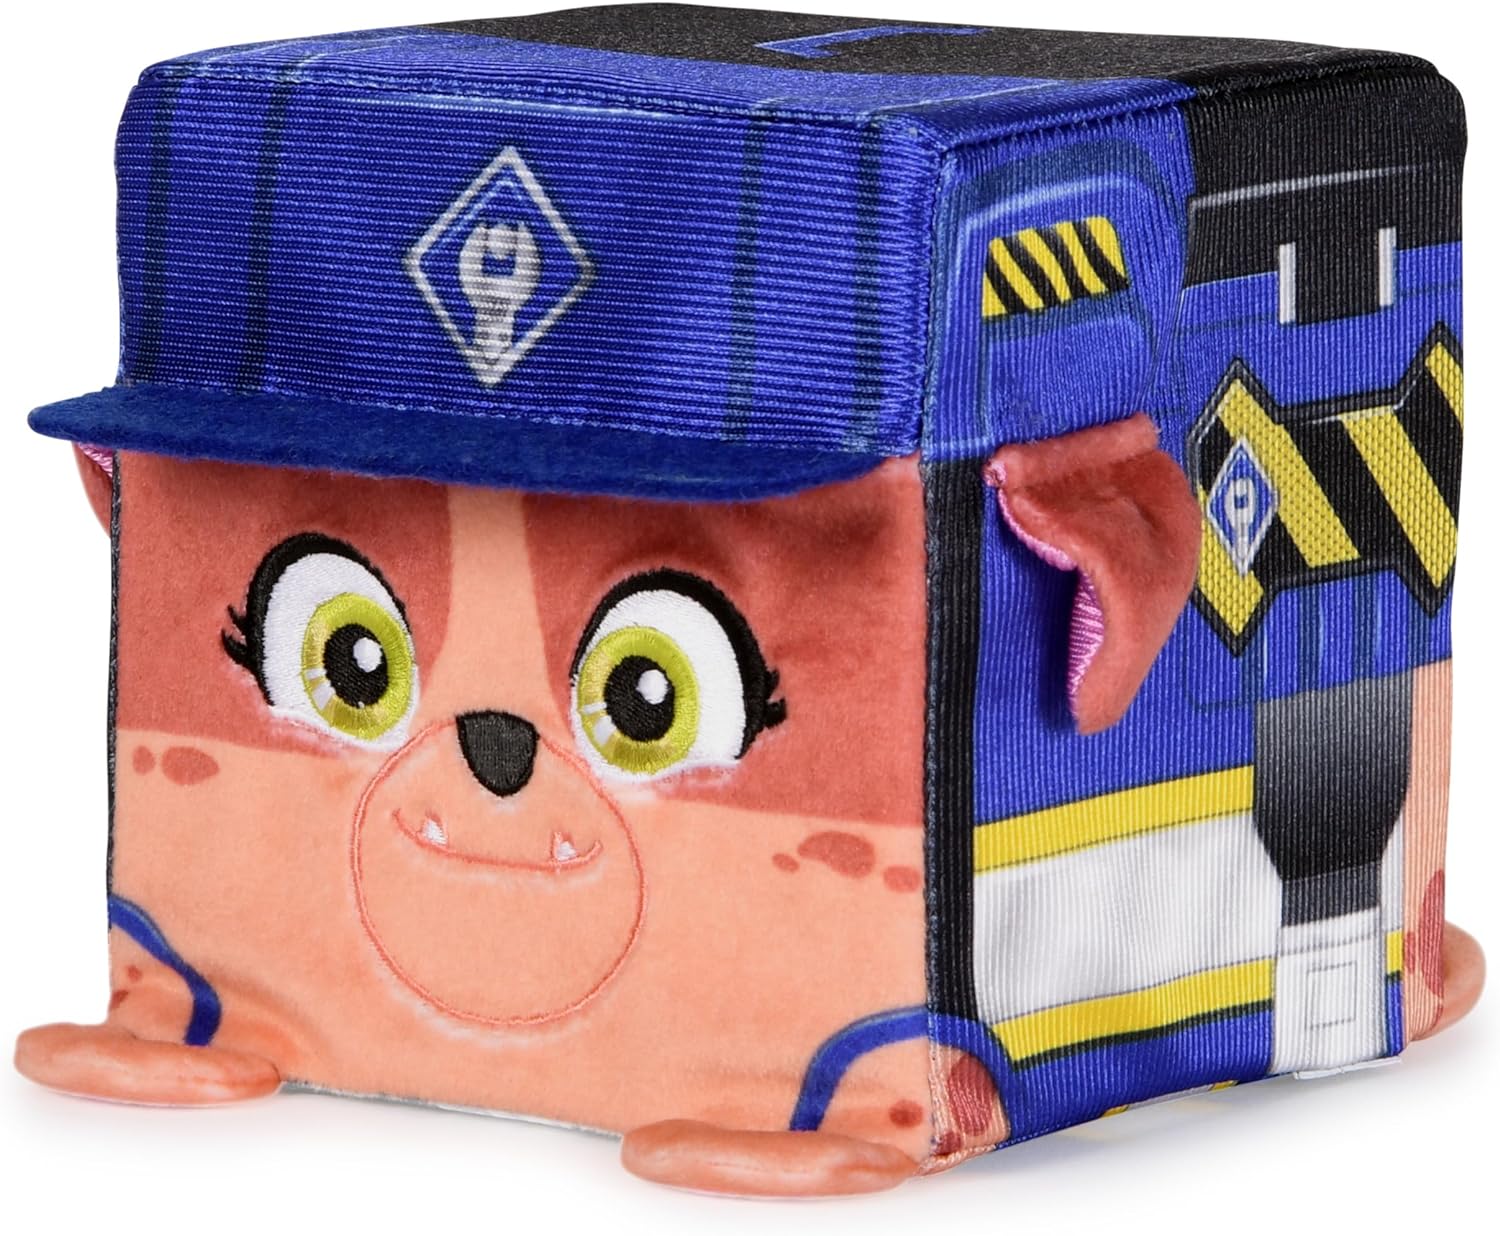 4" Rubble & Crew Stuffed Animal Cube Plush Toy: Mix $4.79, Charger $4.93, Wheeler $4.98 + Free Shipping w/ Prime or on $35+